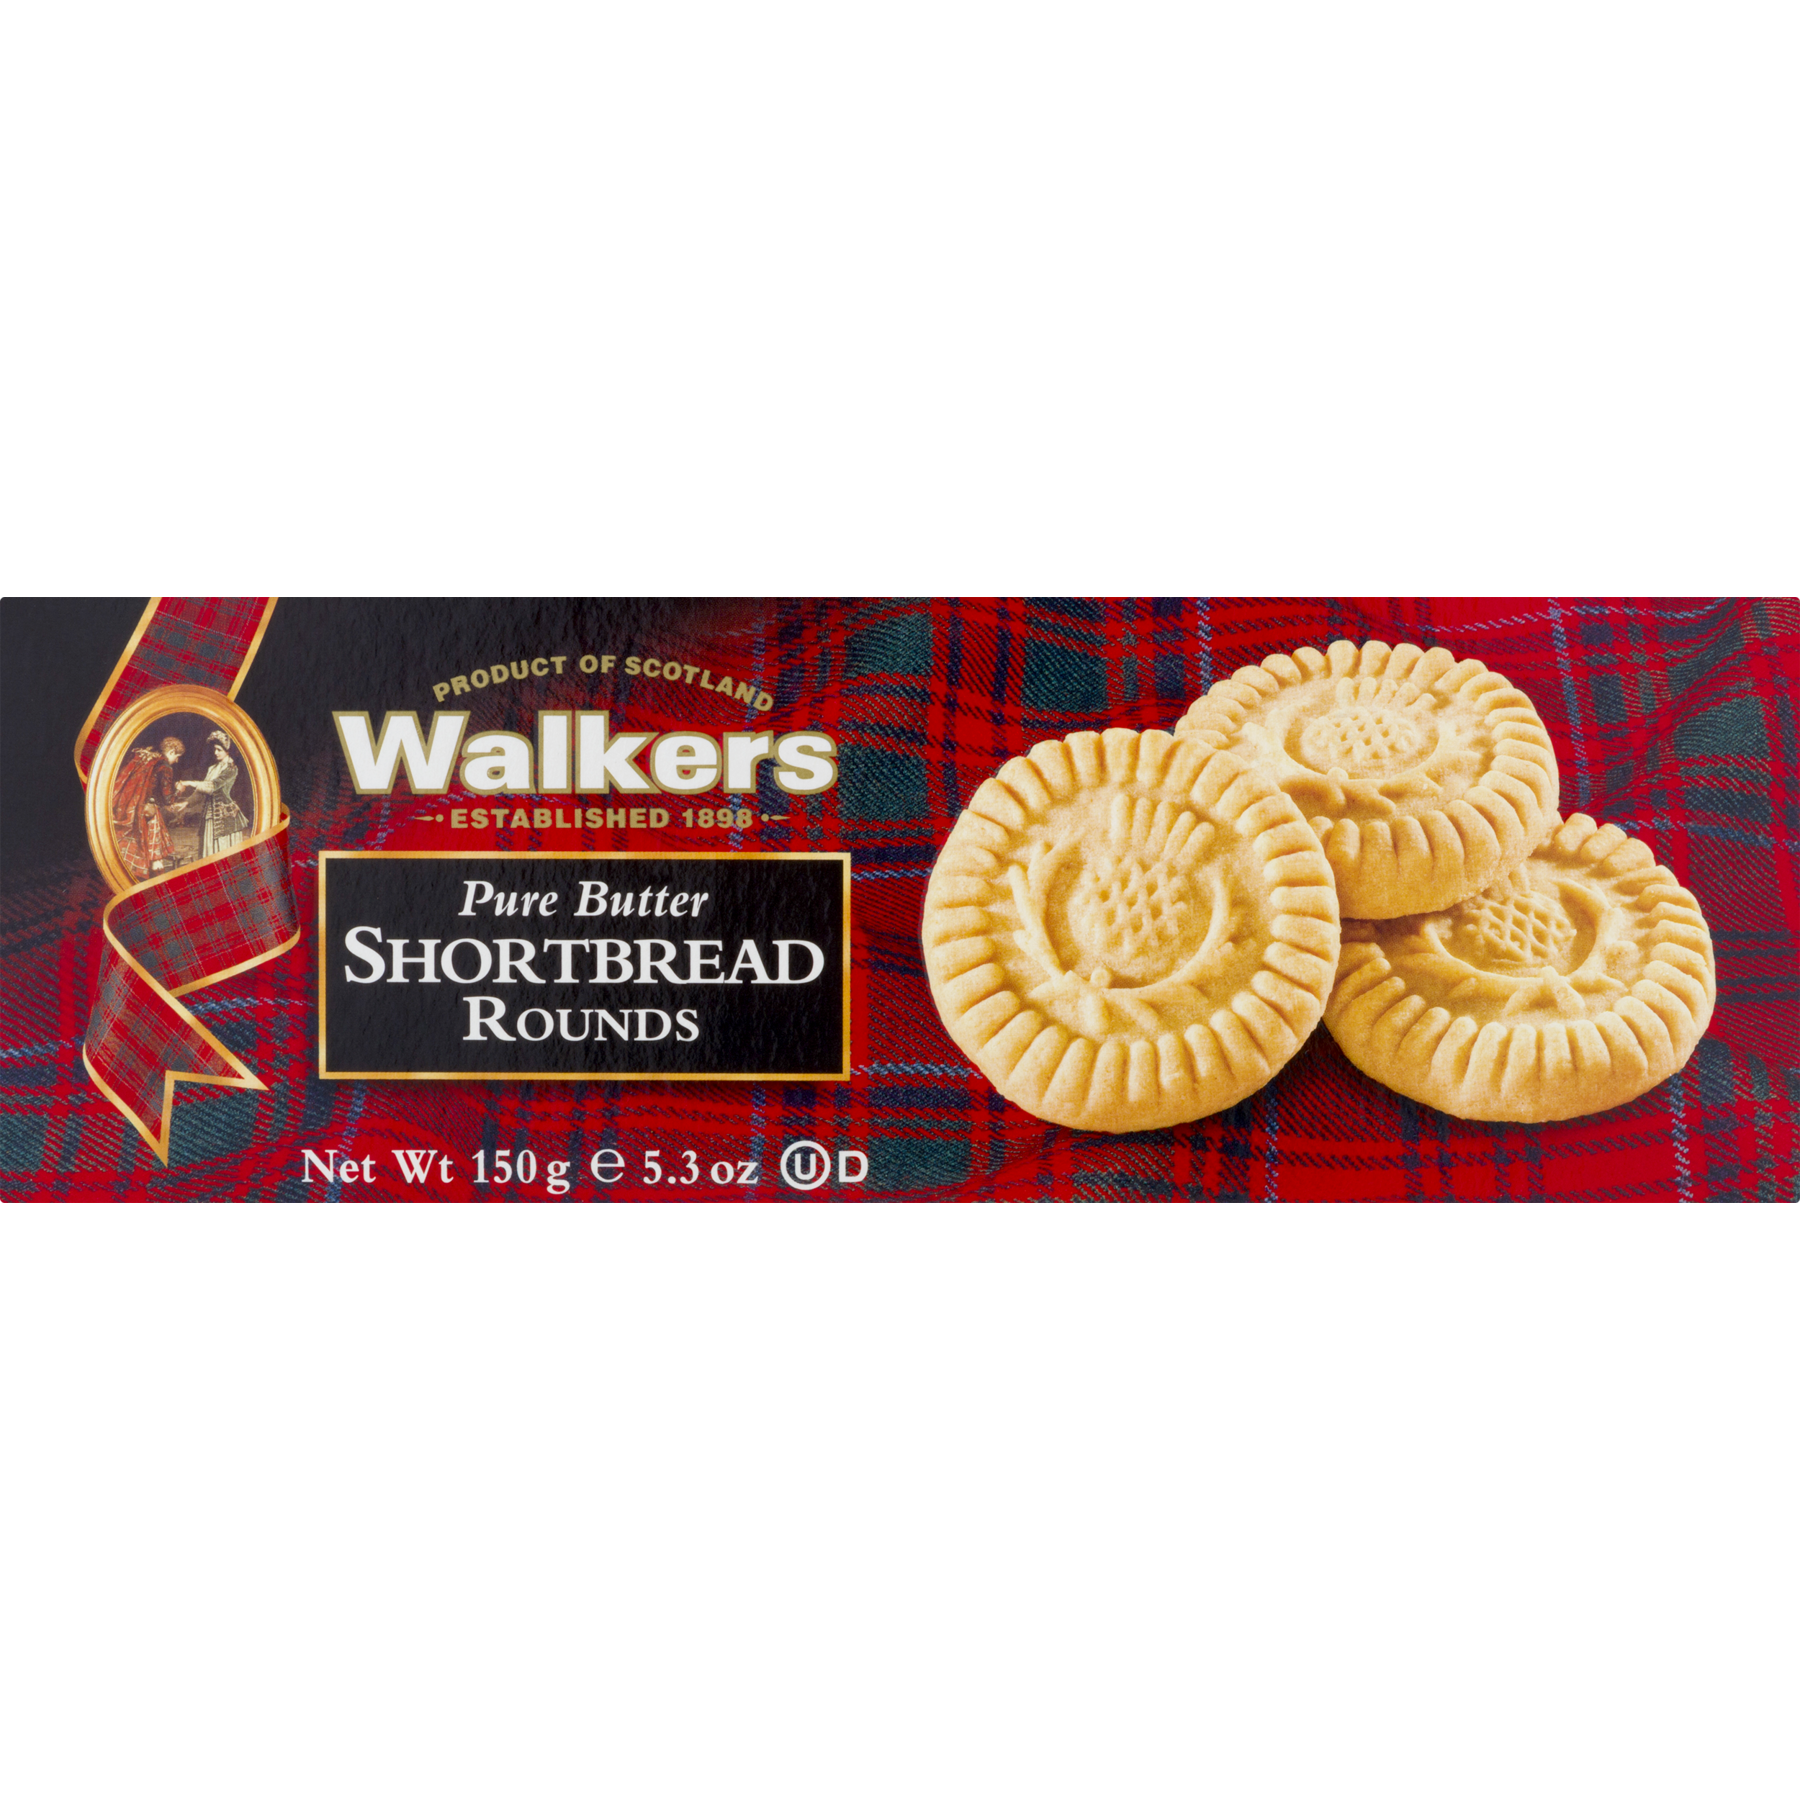 Walkers Pure Butter Shortbread Rounds, 5.3 Oz. - image 4 of 7